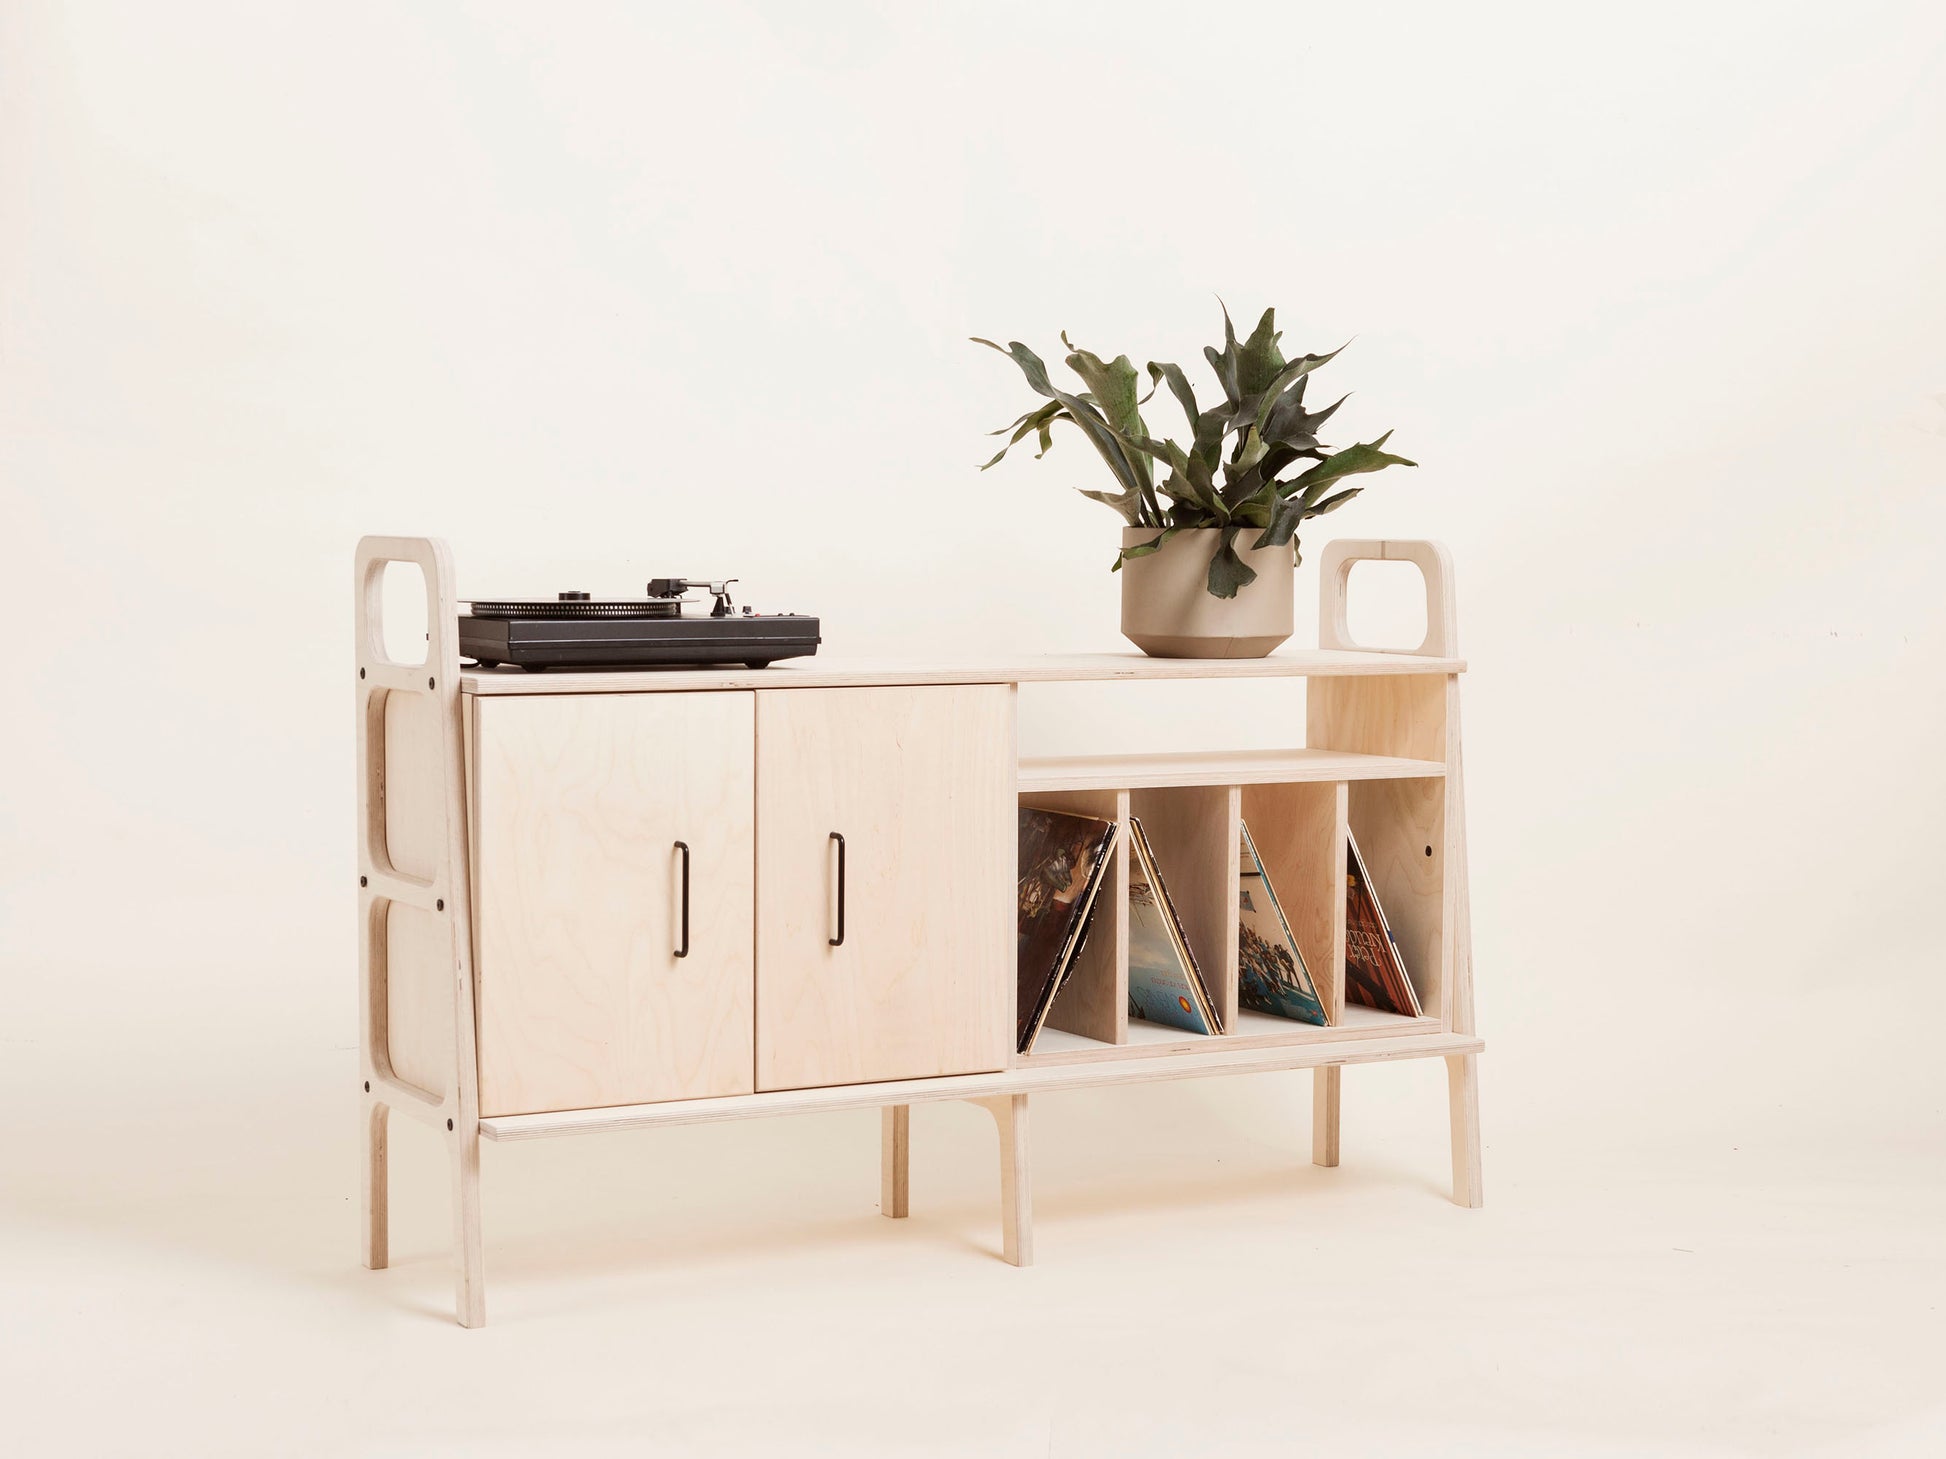 sideboard-mid-century-modern-in-light-colors